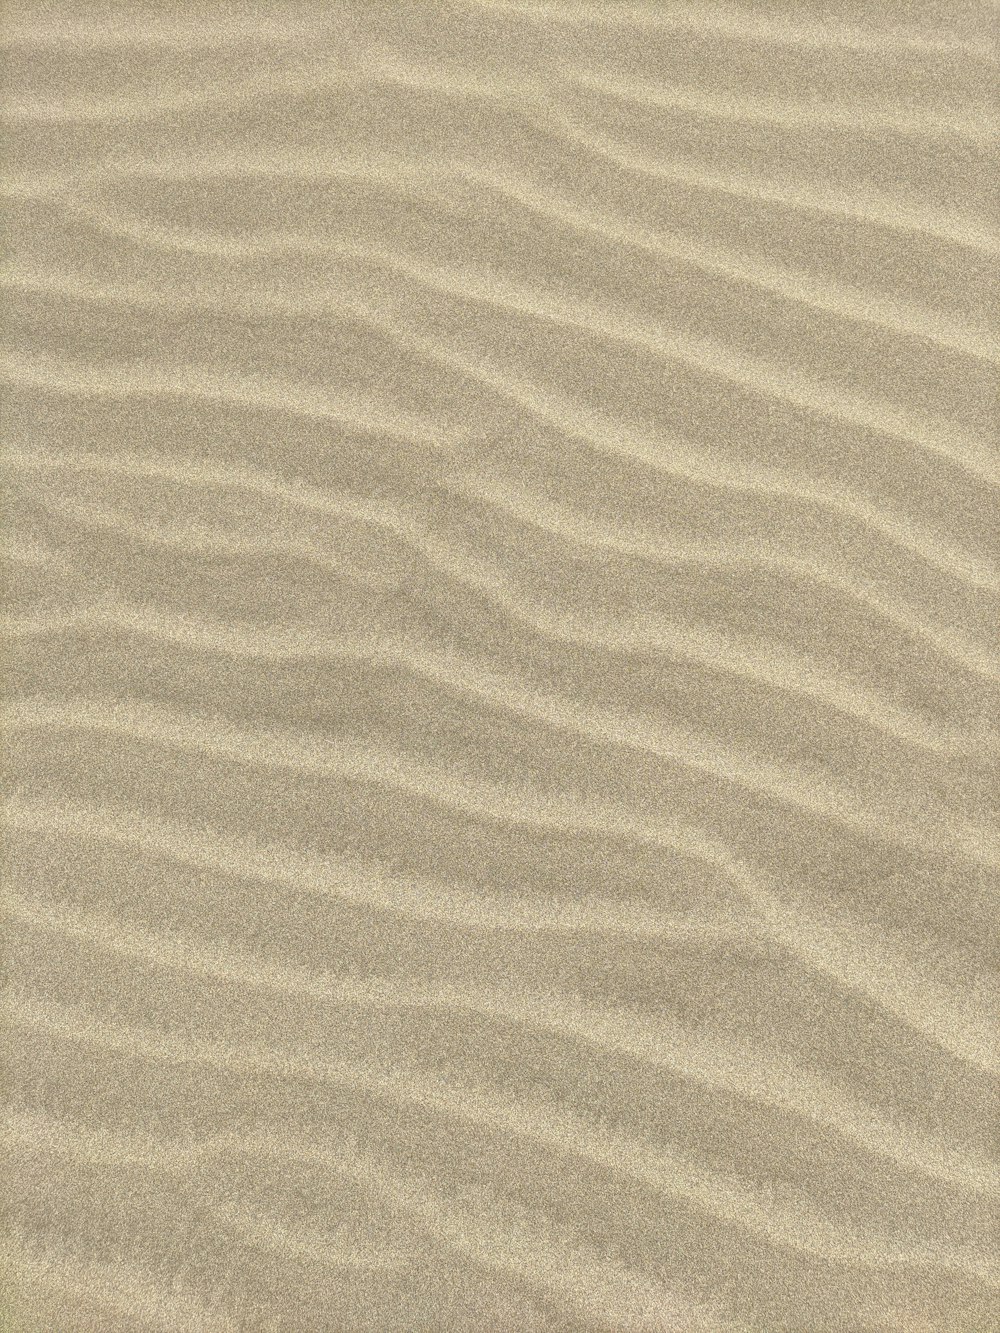 a picture of a sandy beach with waves